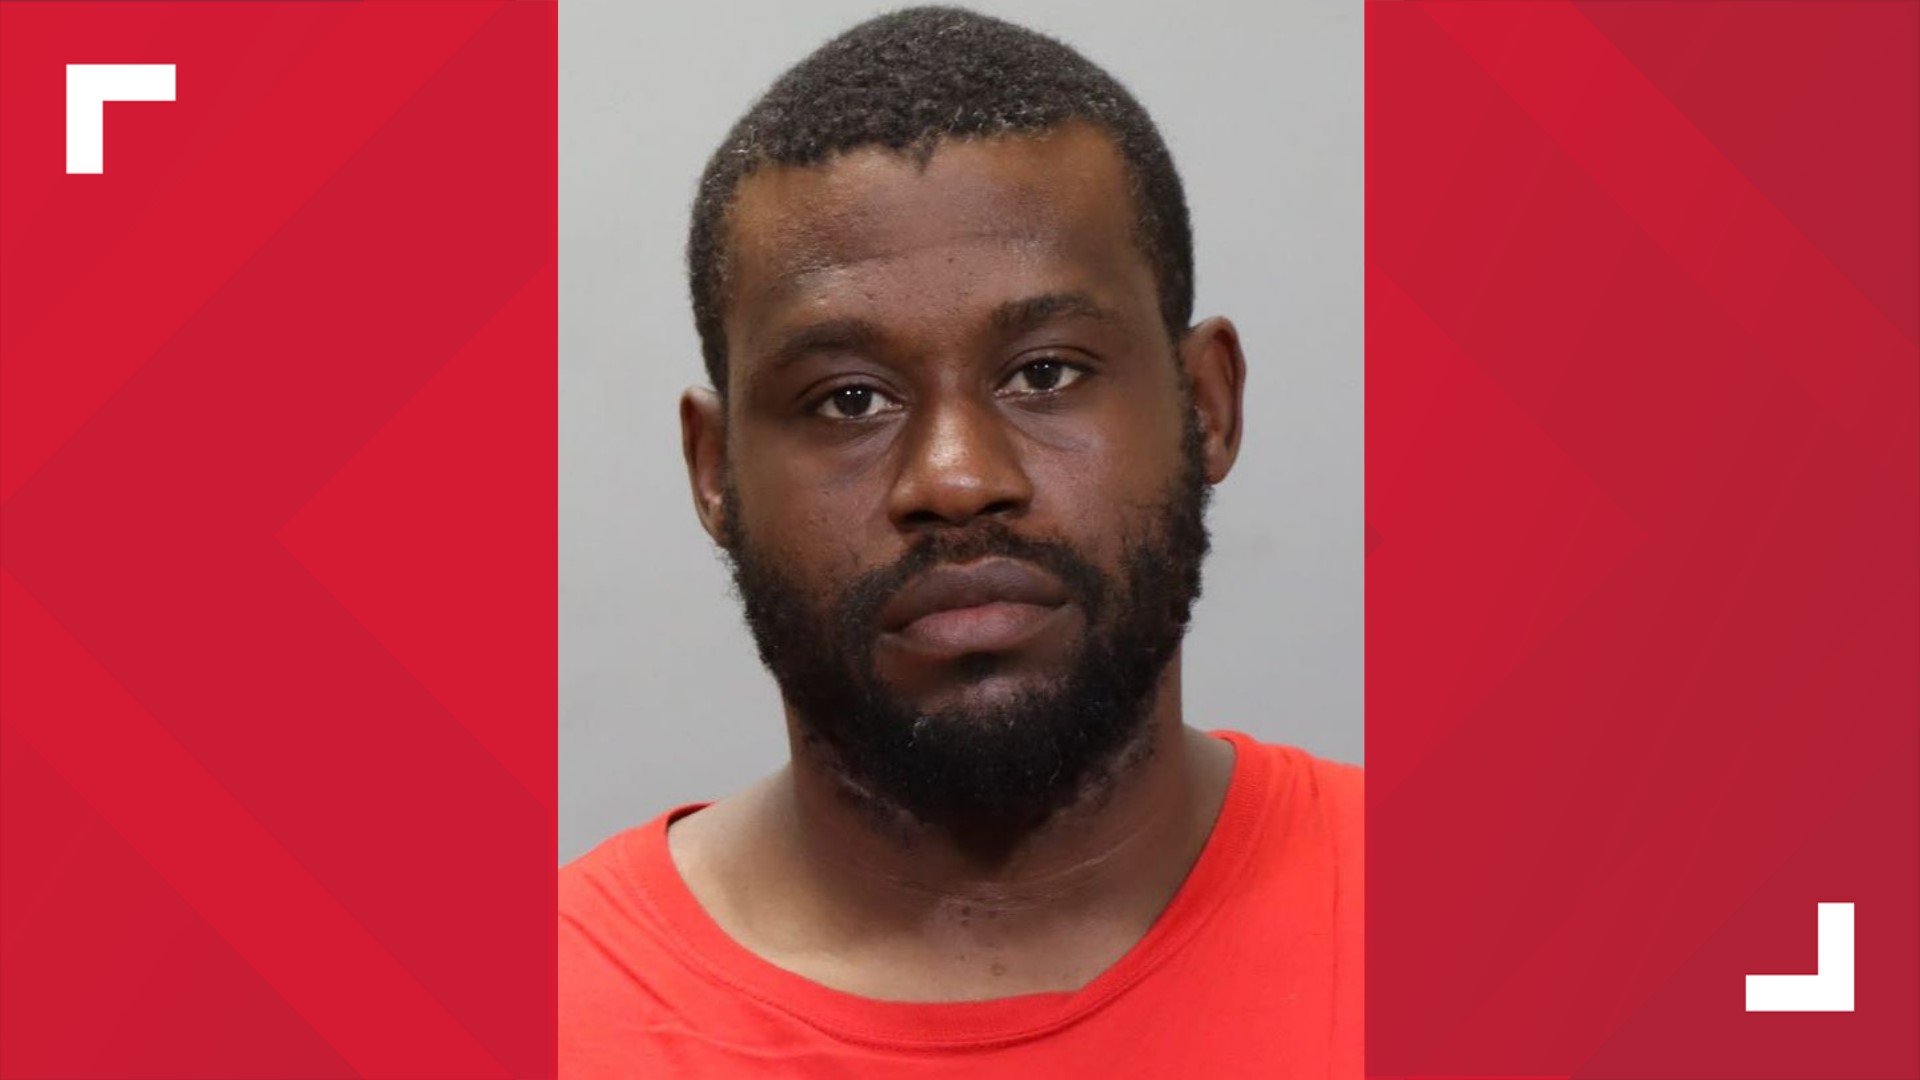 Rashaud Roberts is charged with one count of murder in connection to the shooting death of Isaac Price in northeast Columbus on April 12.